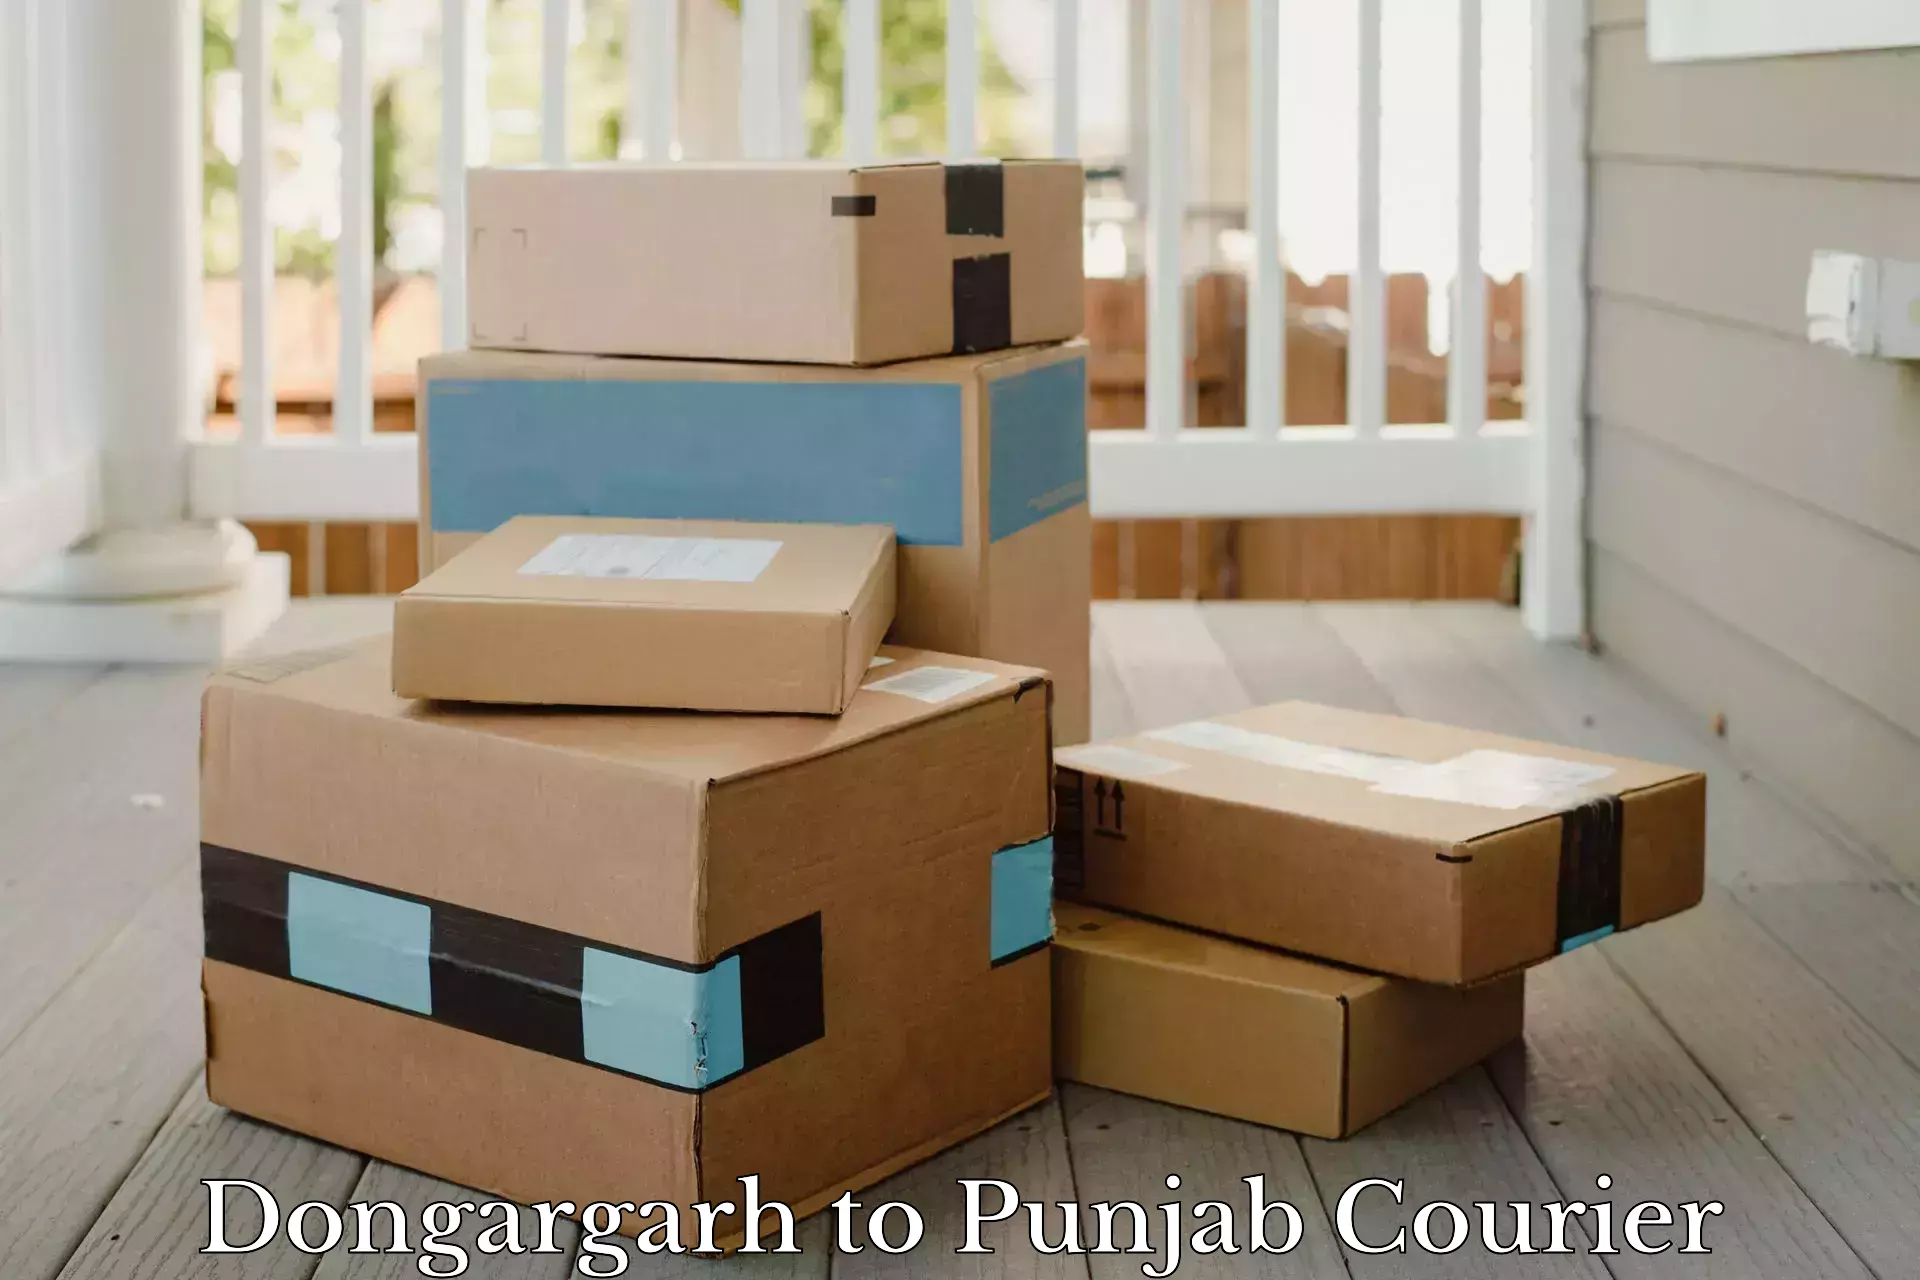 Professional parcel services in Dongargarh to Dharamkot